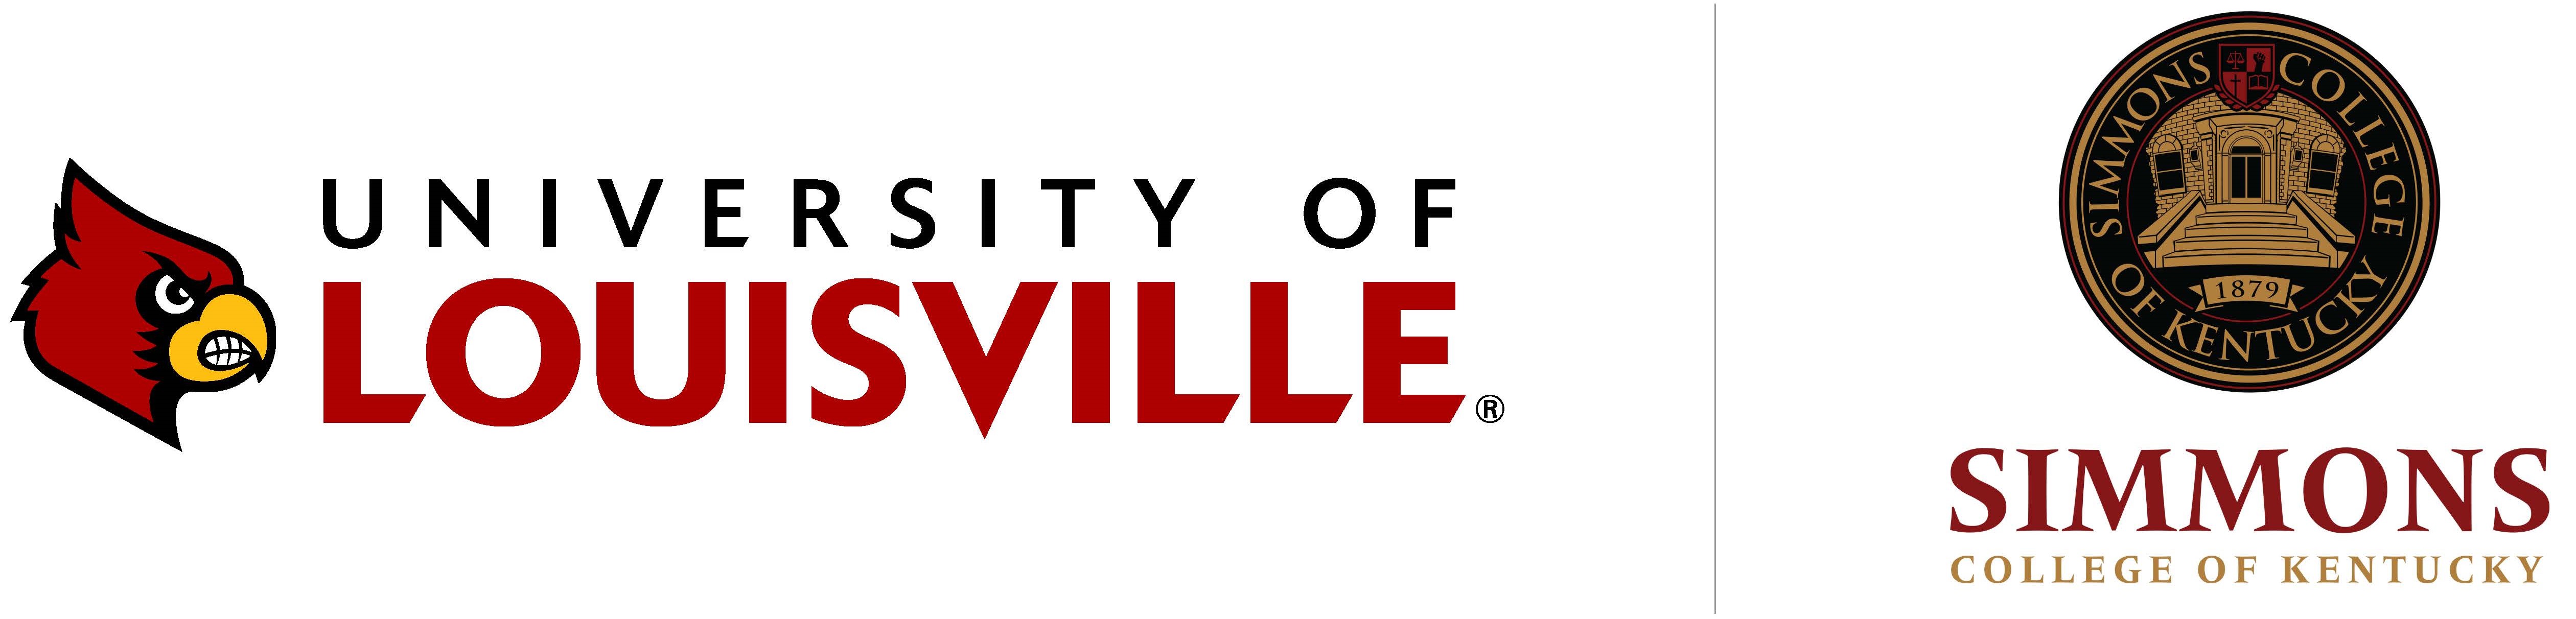 UofL and Simmons logos combined into one image for use with the release